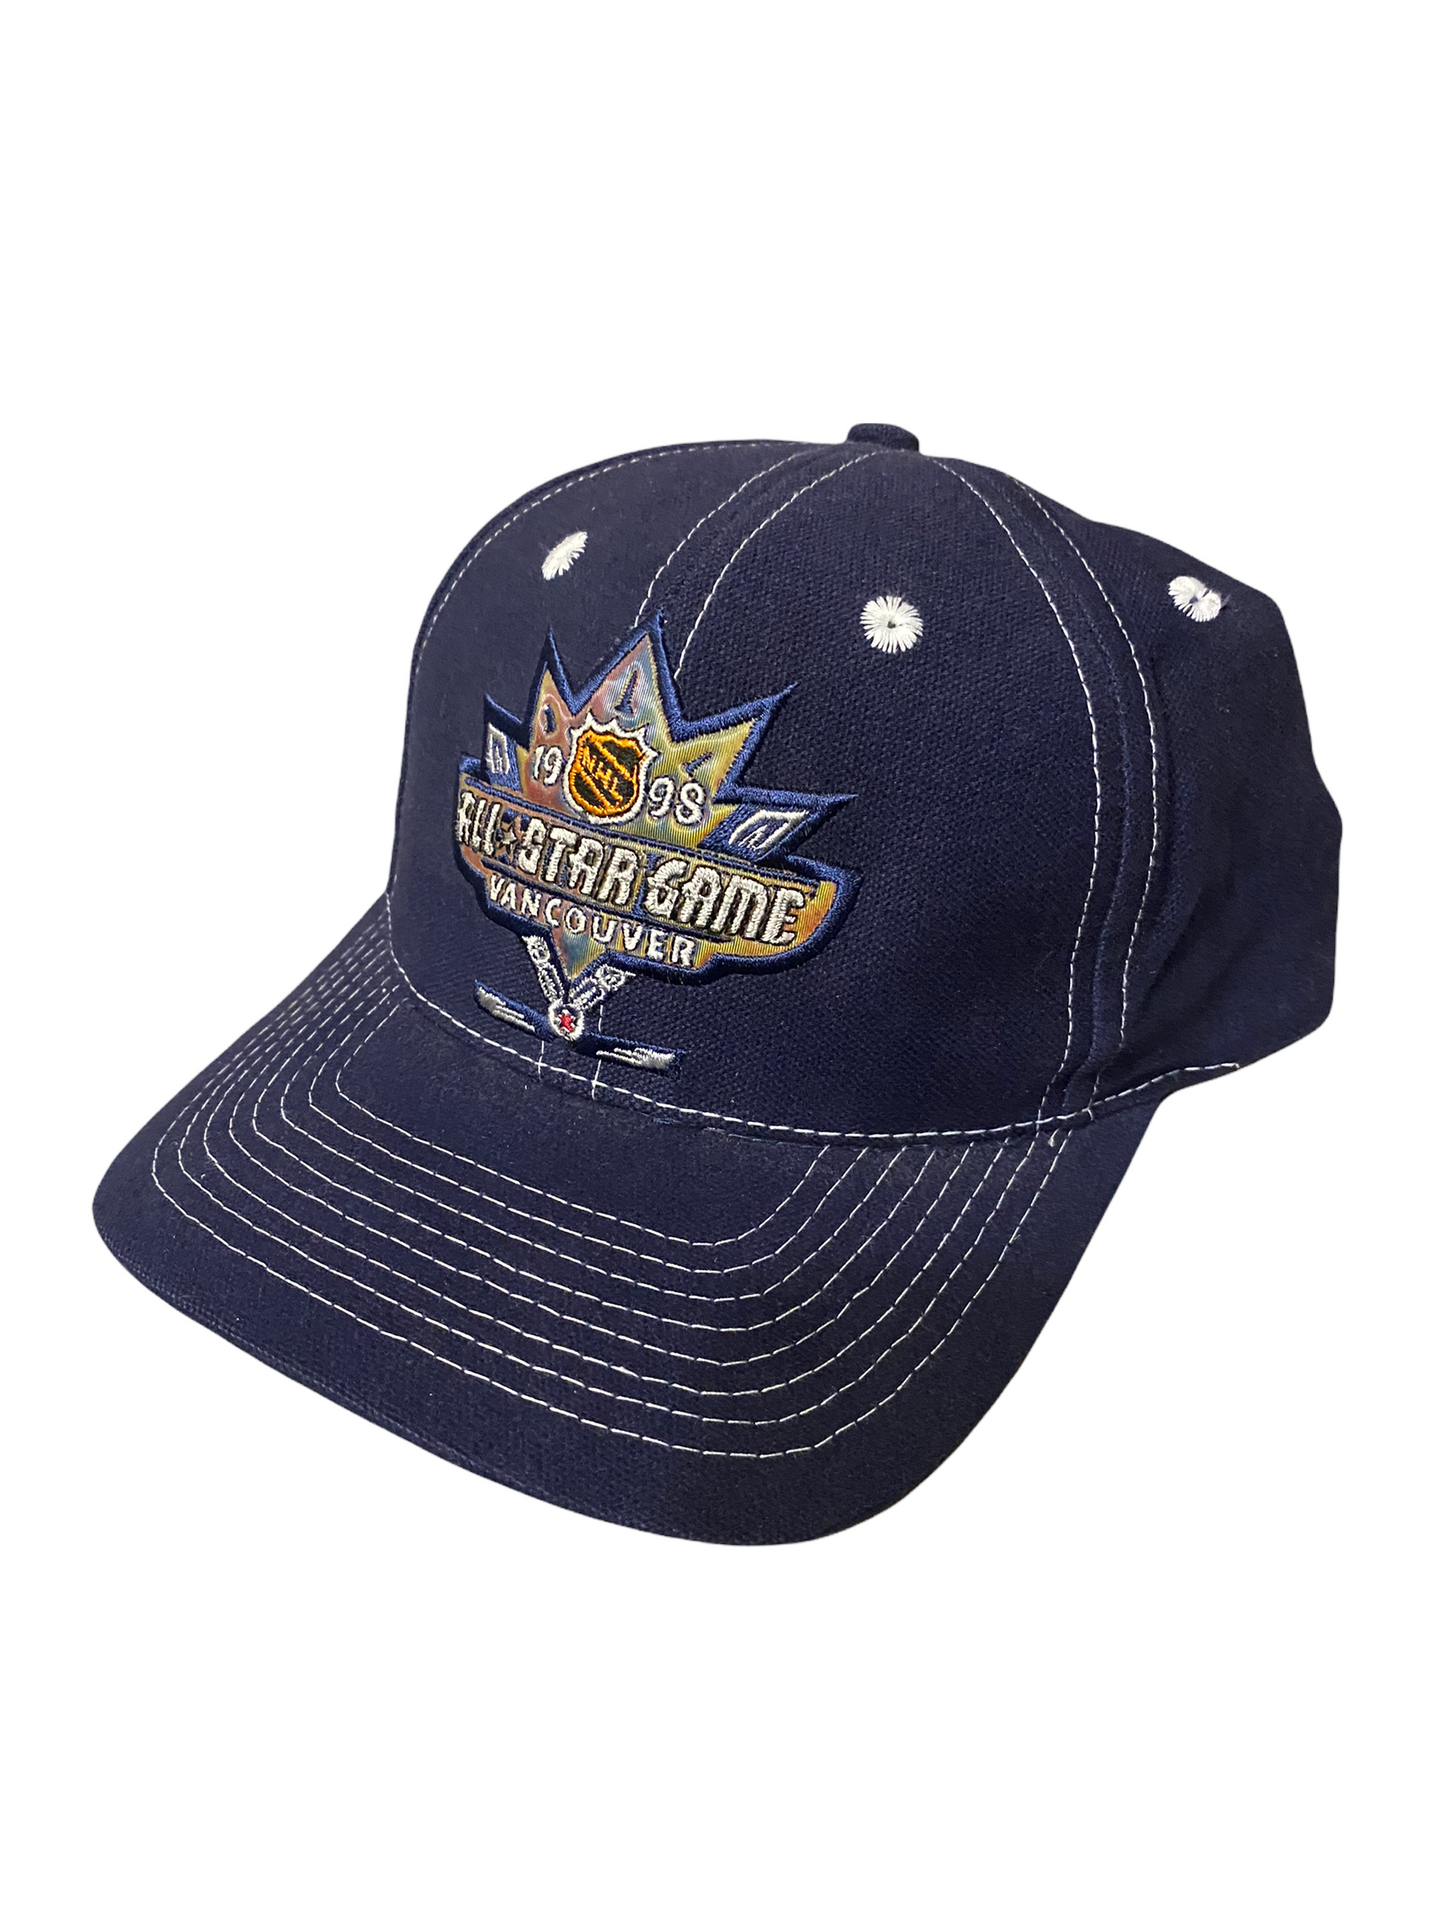 1998 NHL All Star Game Hat